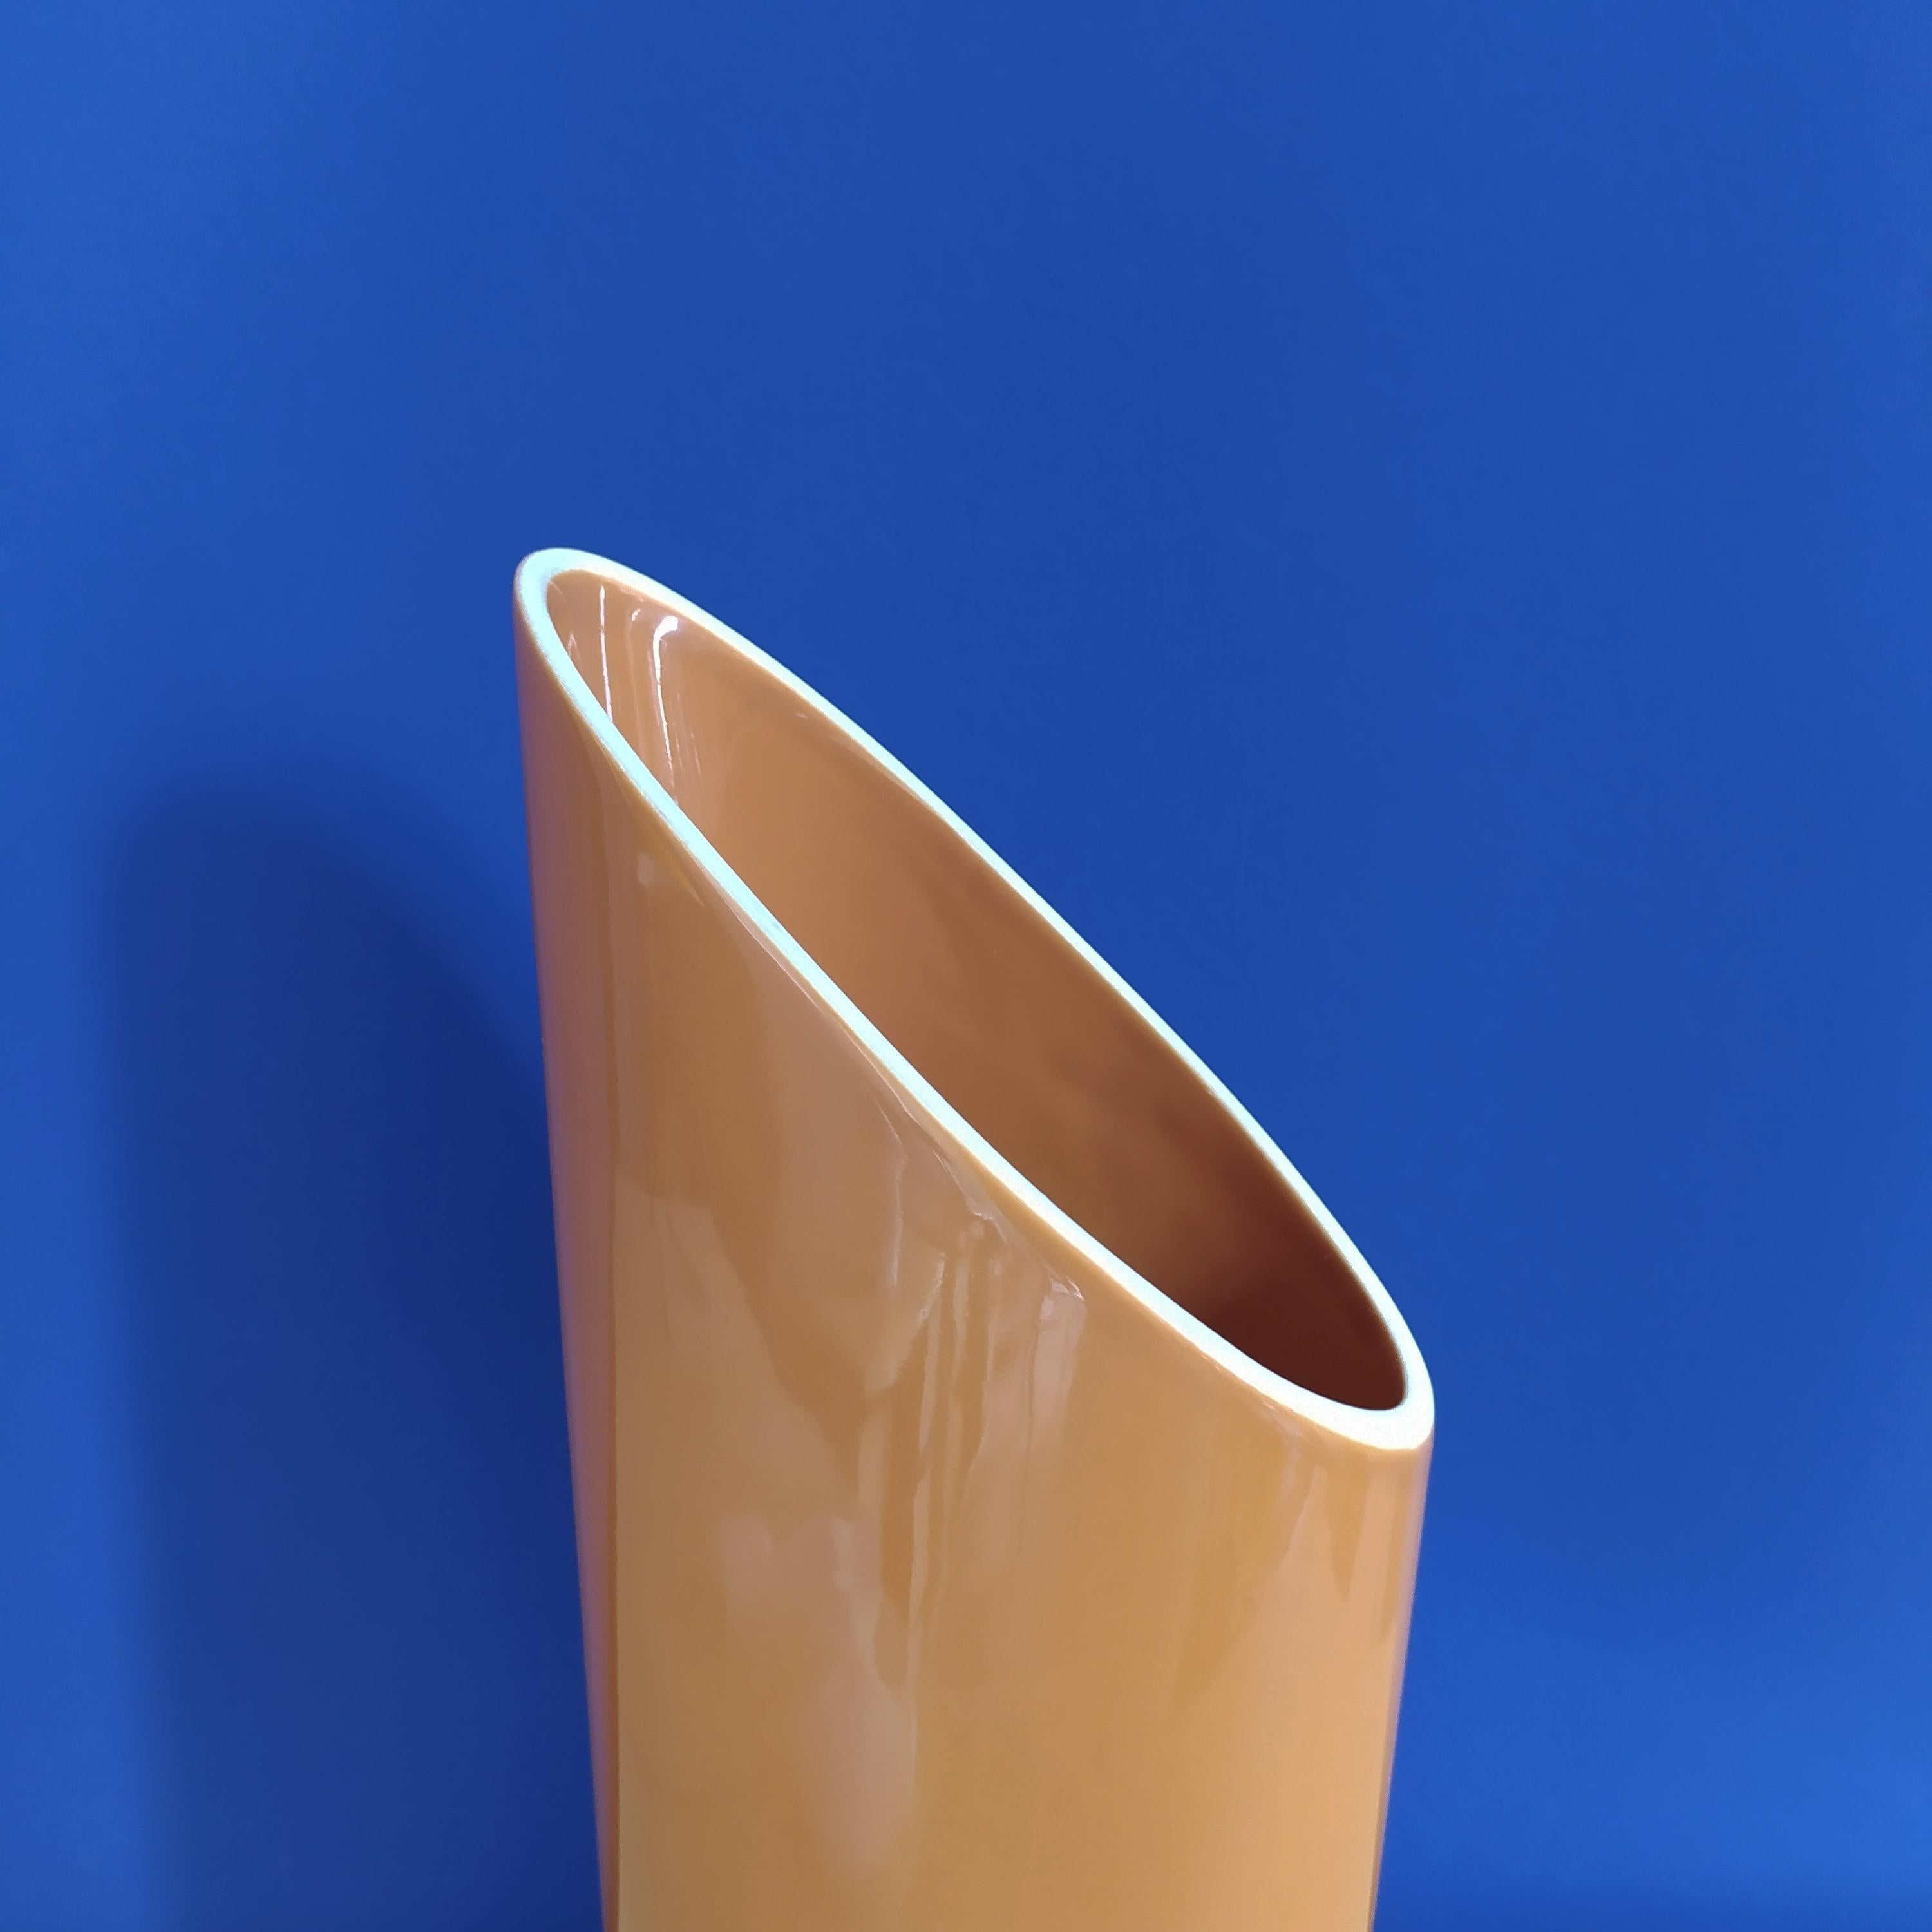 1970s Astonishing Space Age Orange Vase in Ceramic, Made in Italy In Excellent Condition For Sale In Milan, IT